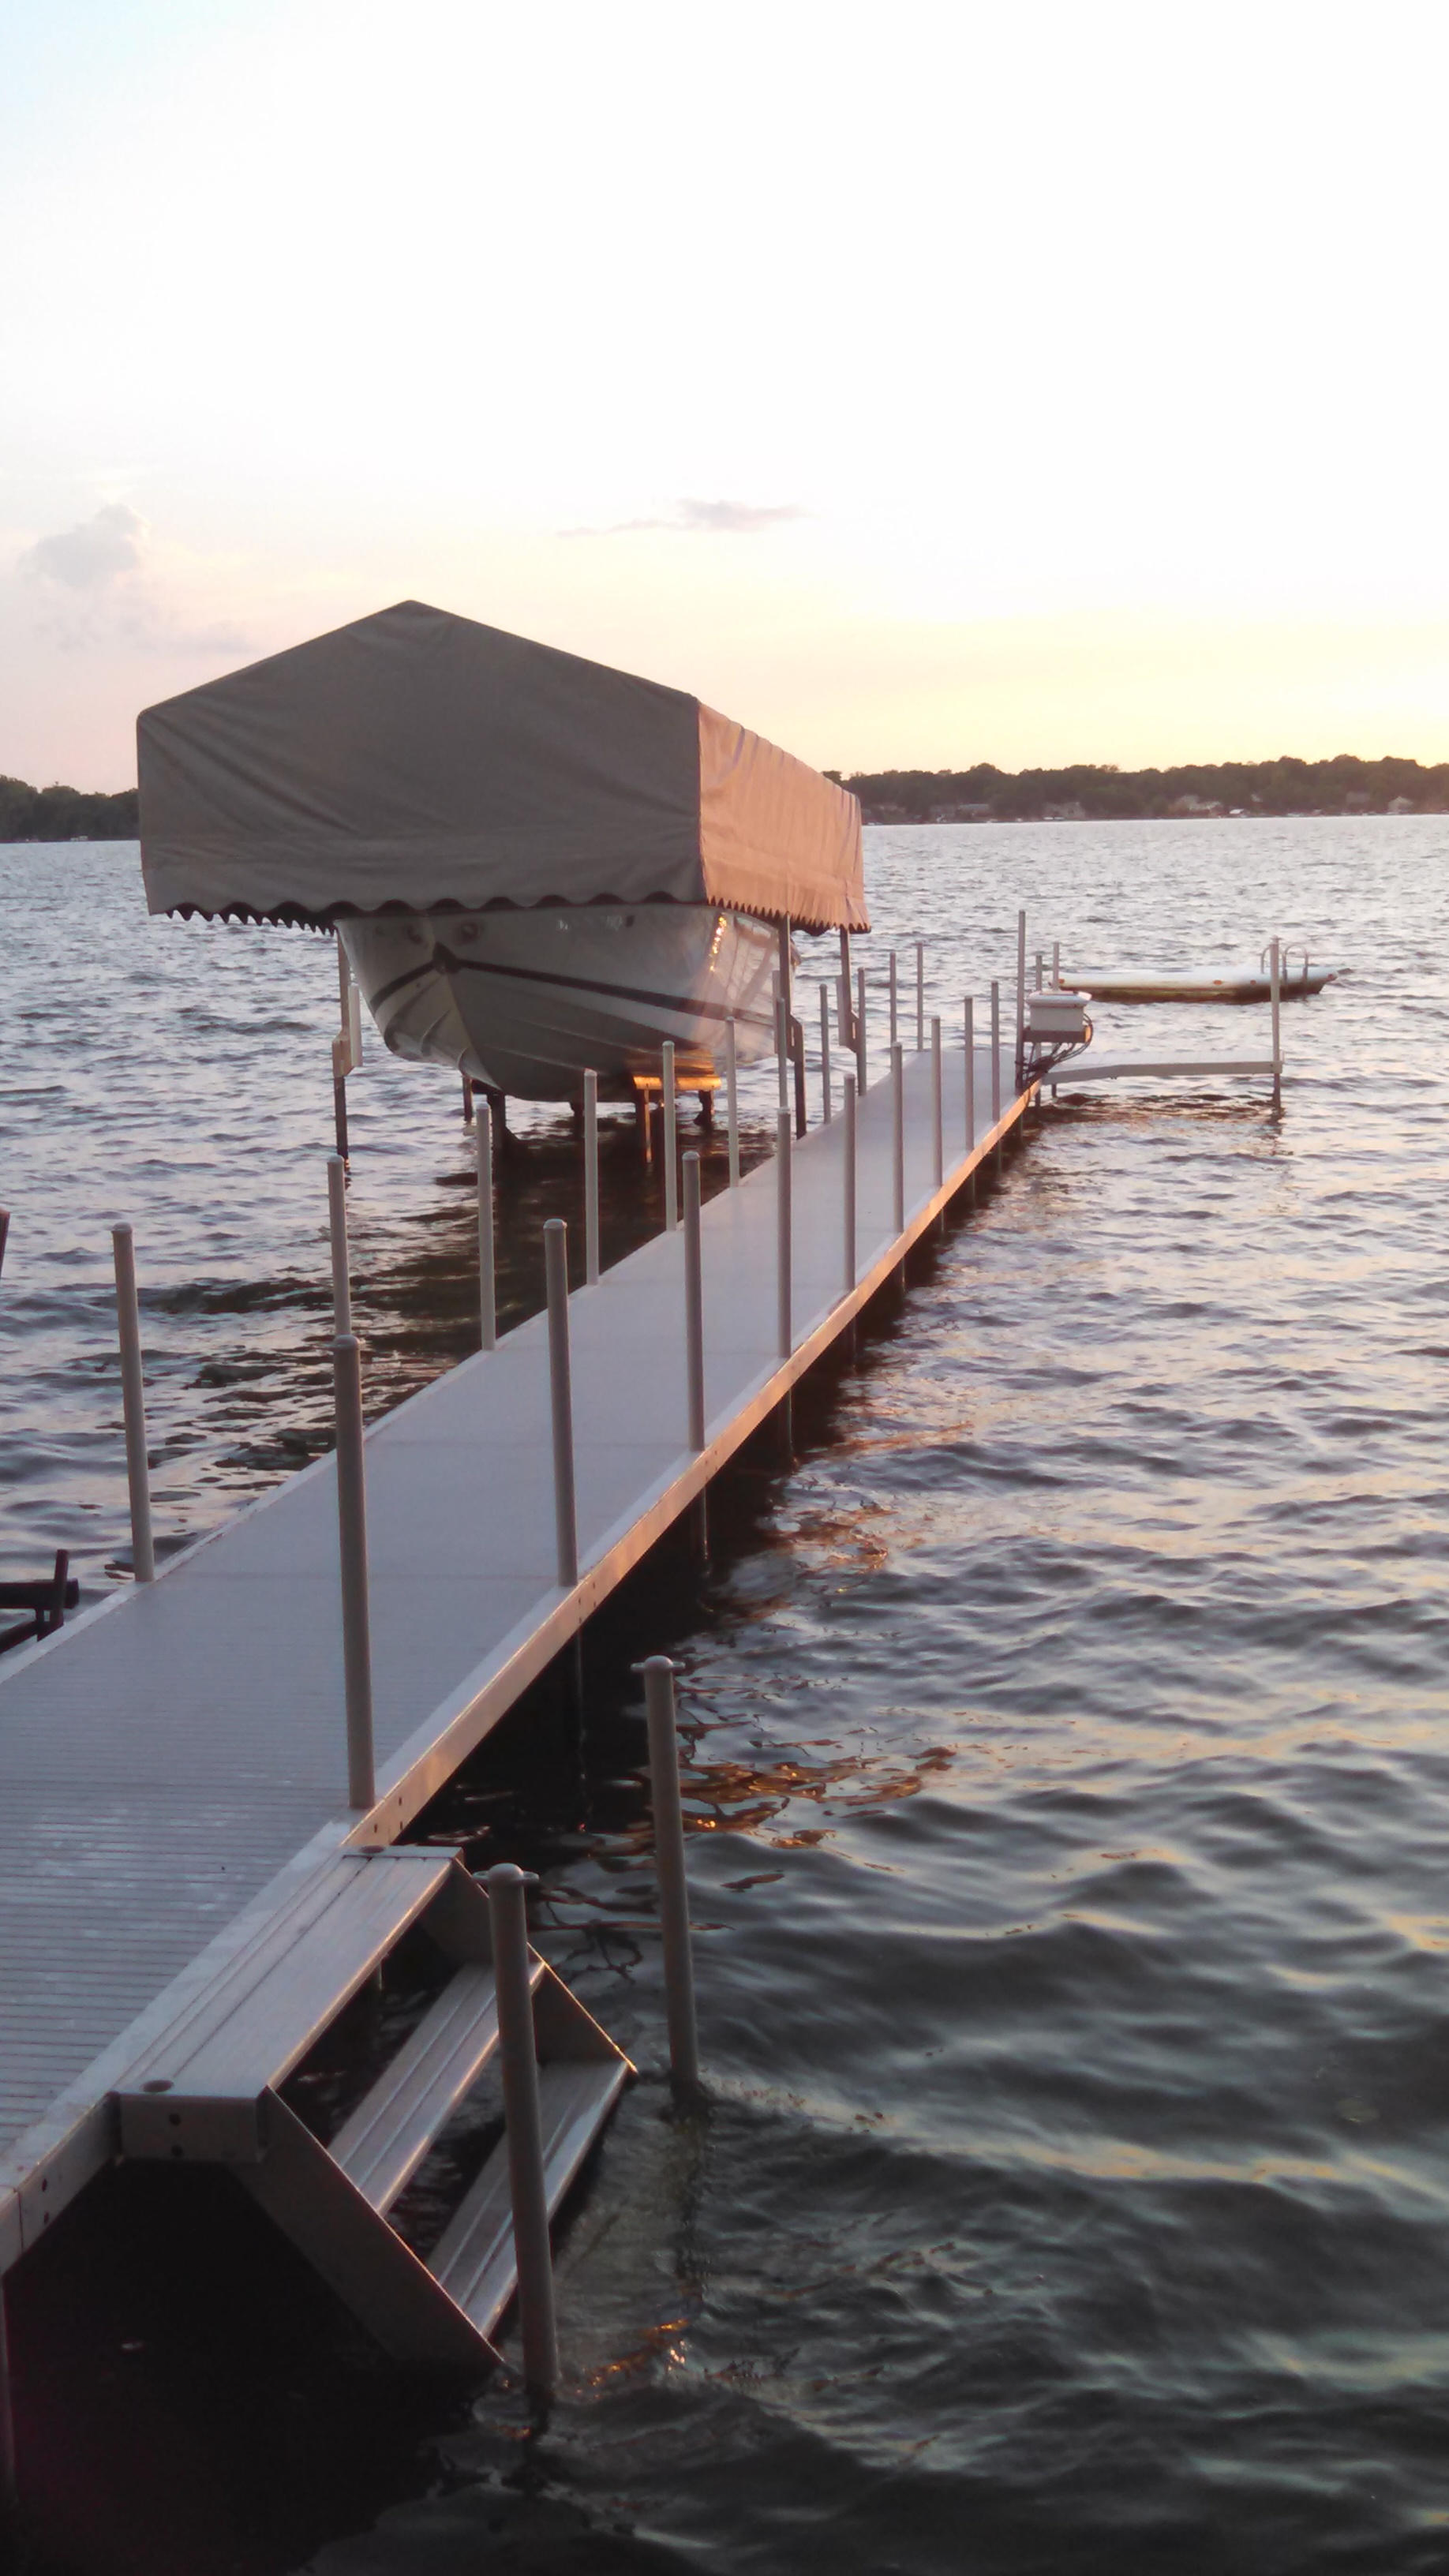 Solo Dock supports local lake associations by making a donation for each new dock sold.